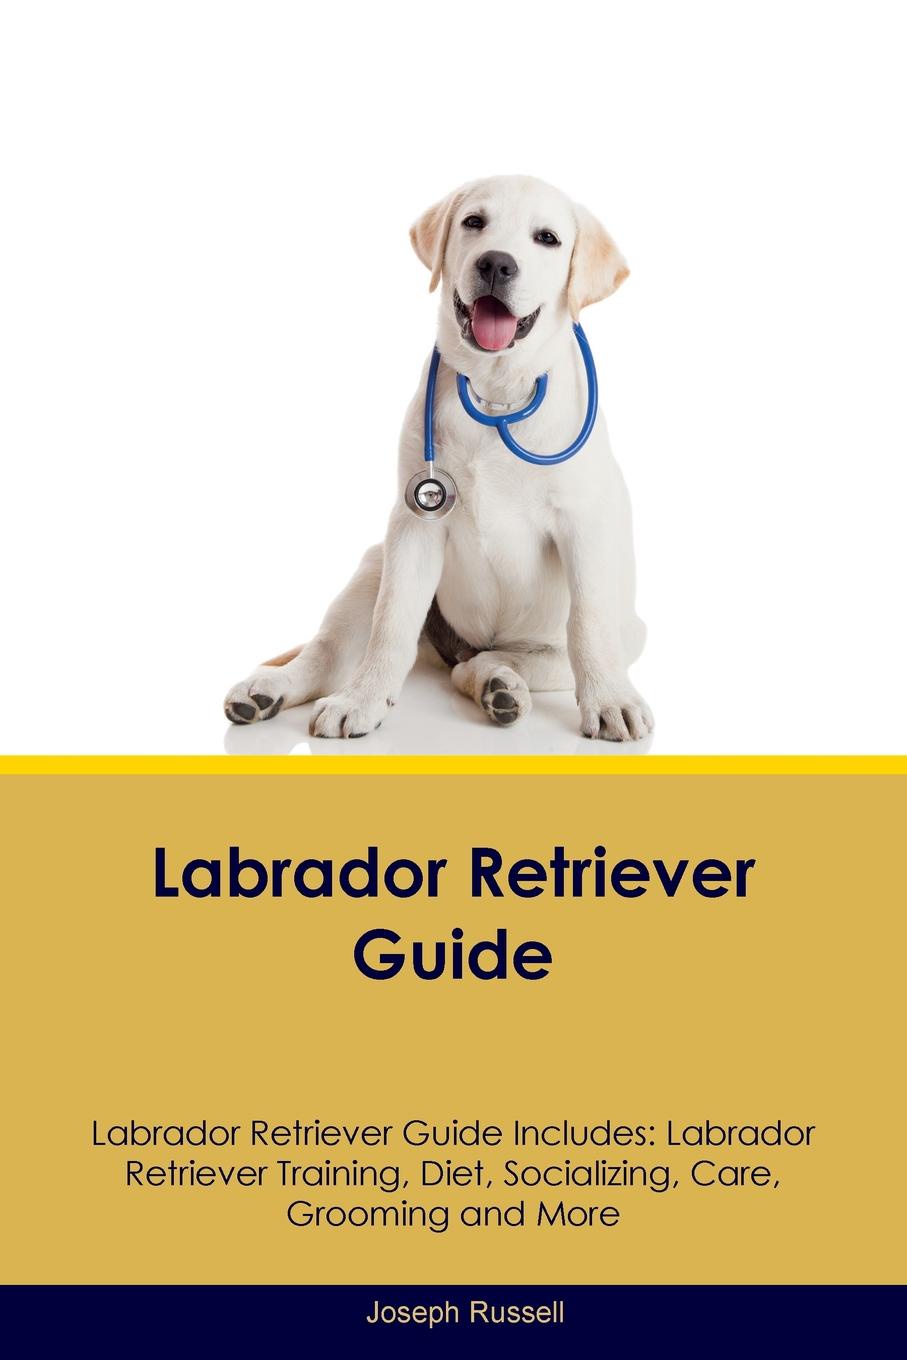 Labrador Retriever Guide Labrador Retriever Guide Includes. Labrador Retriever Training, Diet, Socializing, Care, Grooming, Breeding and More